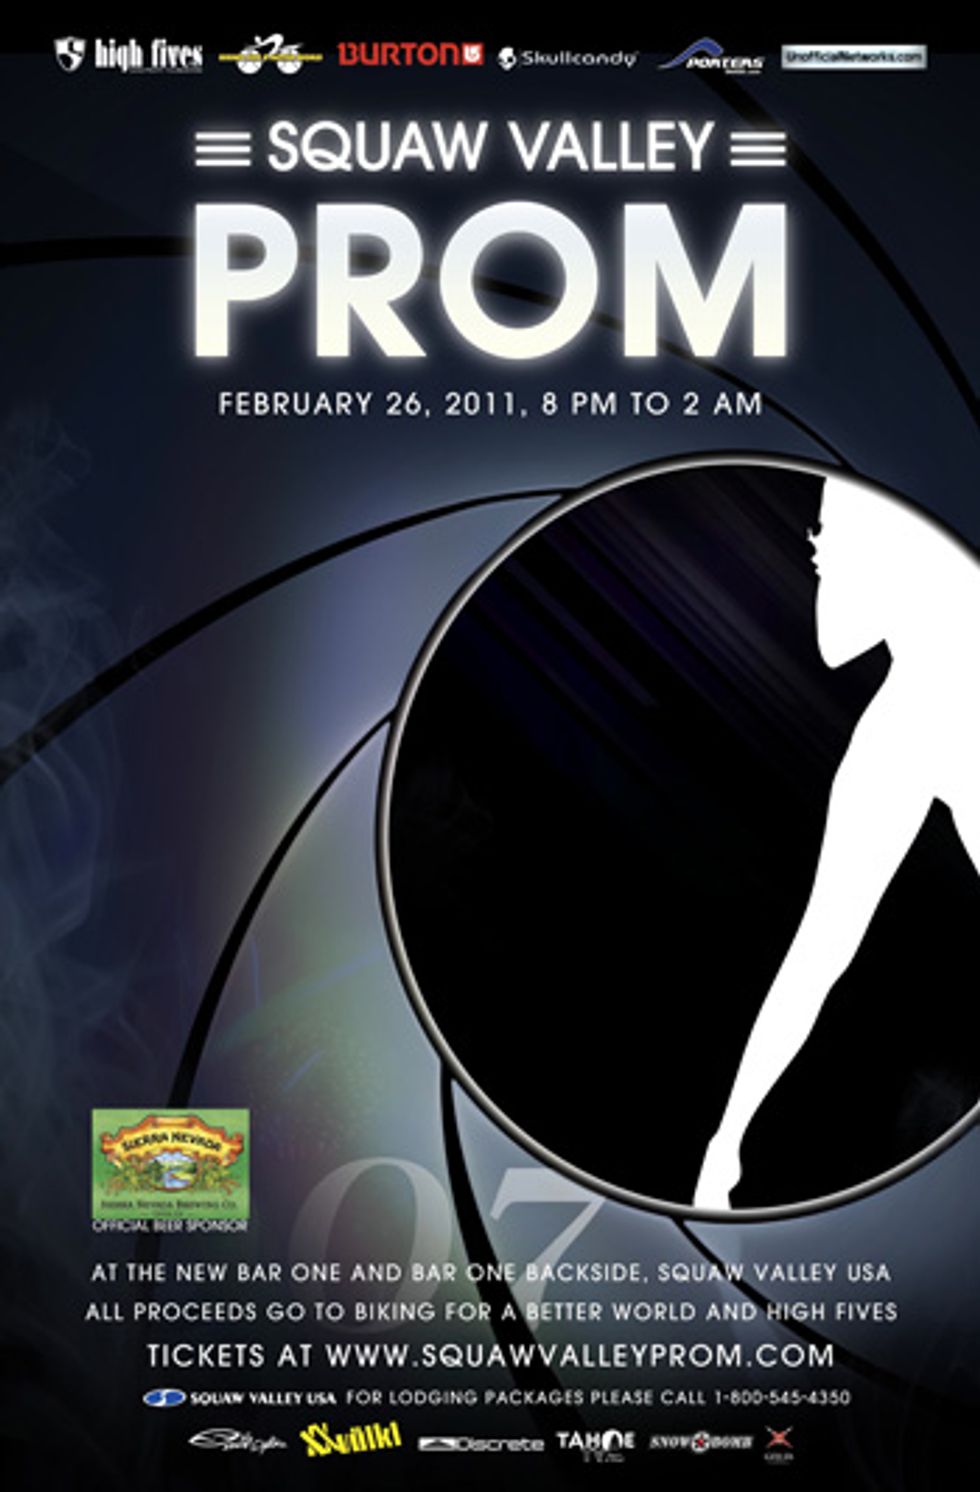 Shaken, Not Stirred: Get Your Bond on at the Squaw Valley Prom This Weekend